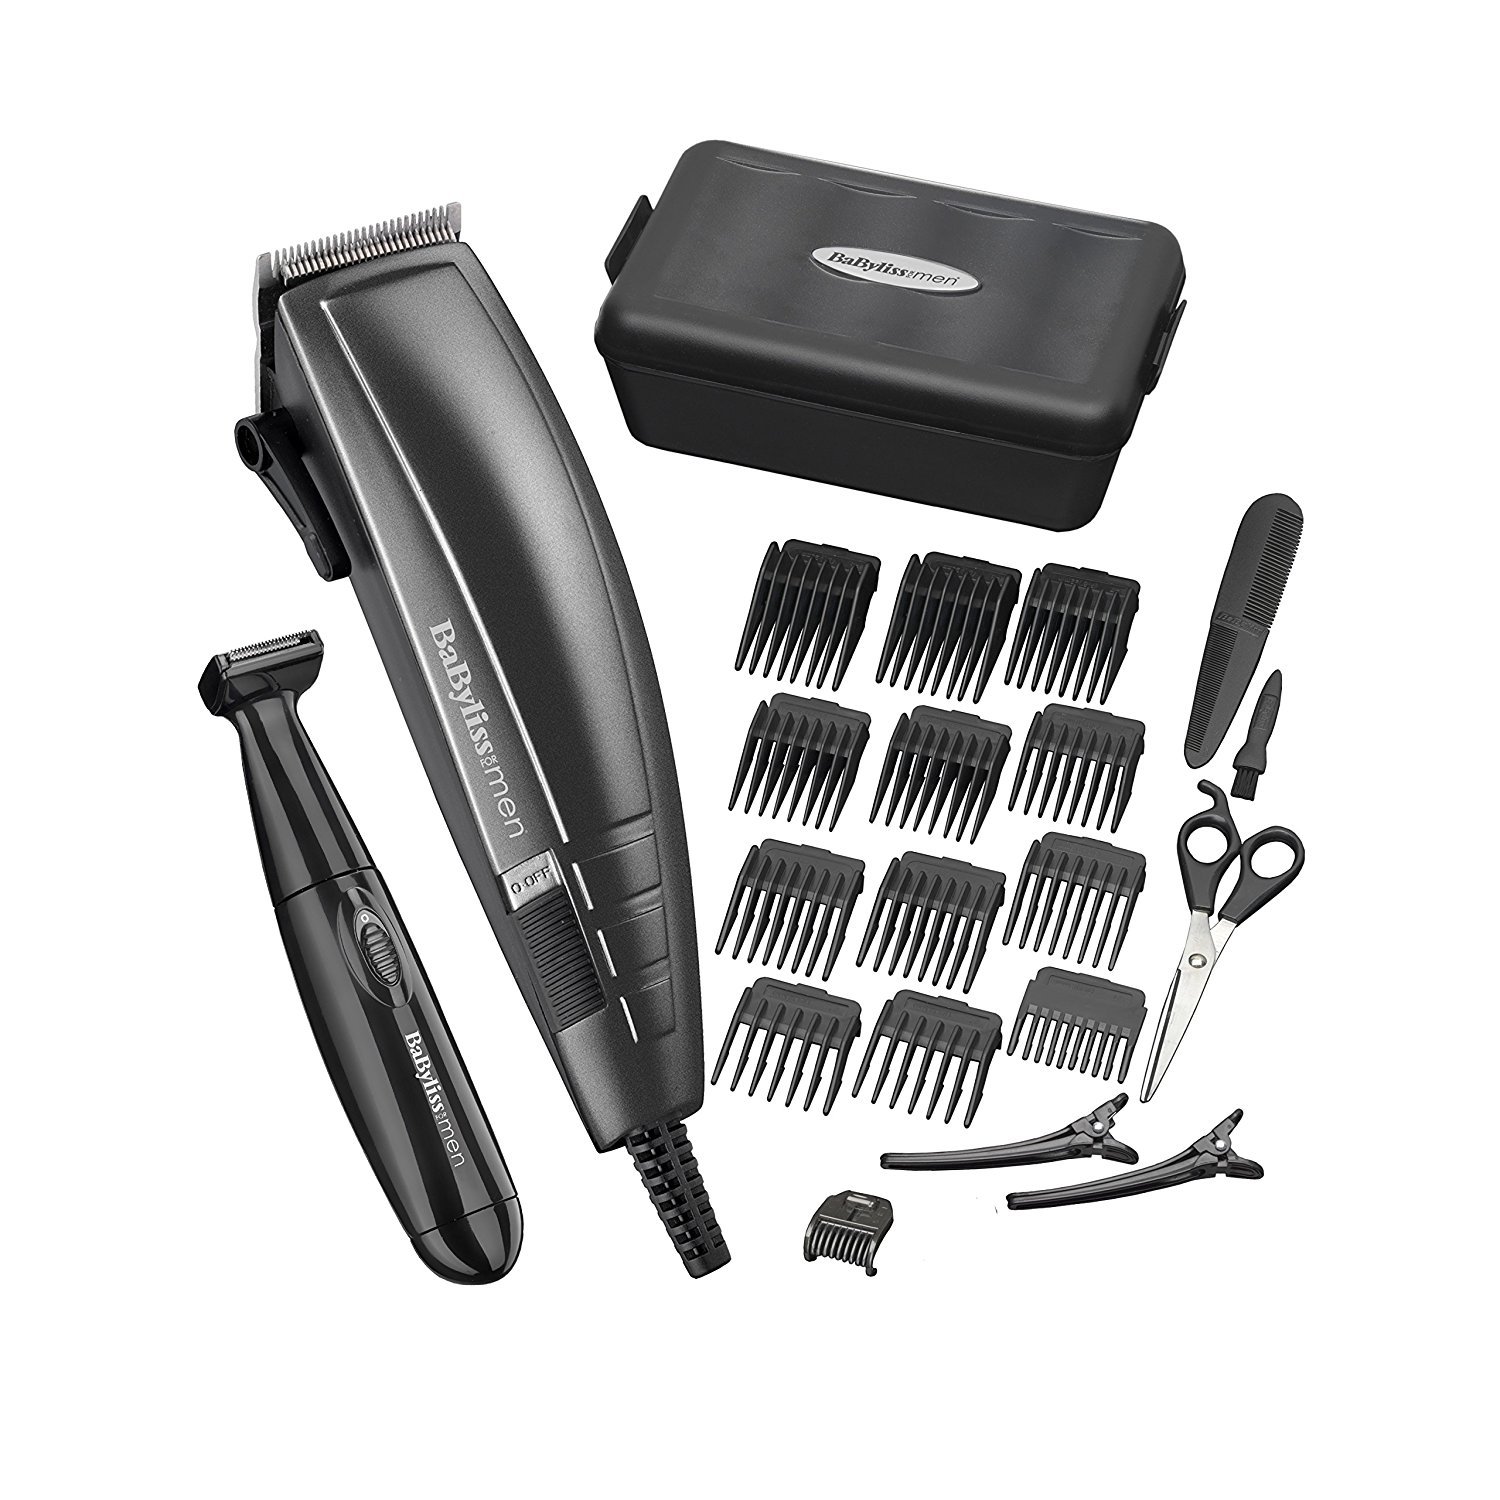 Top Rated Babyliss Hair Clipper UK Products